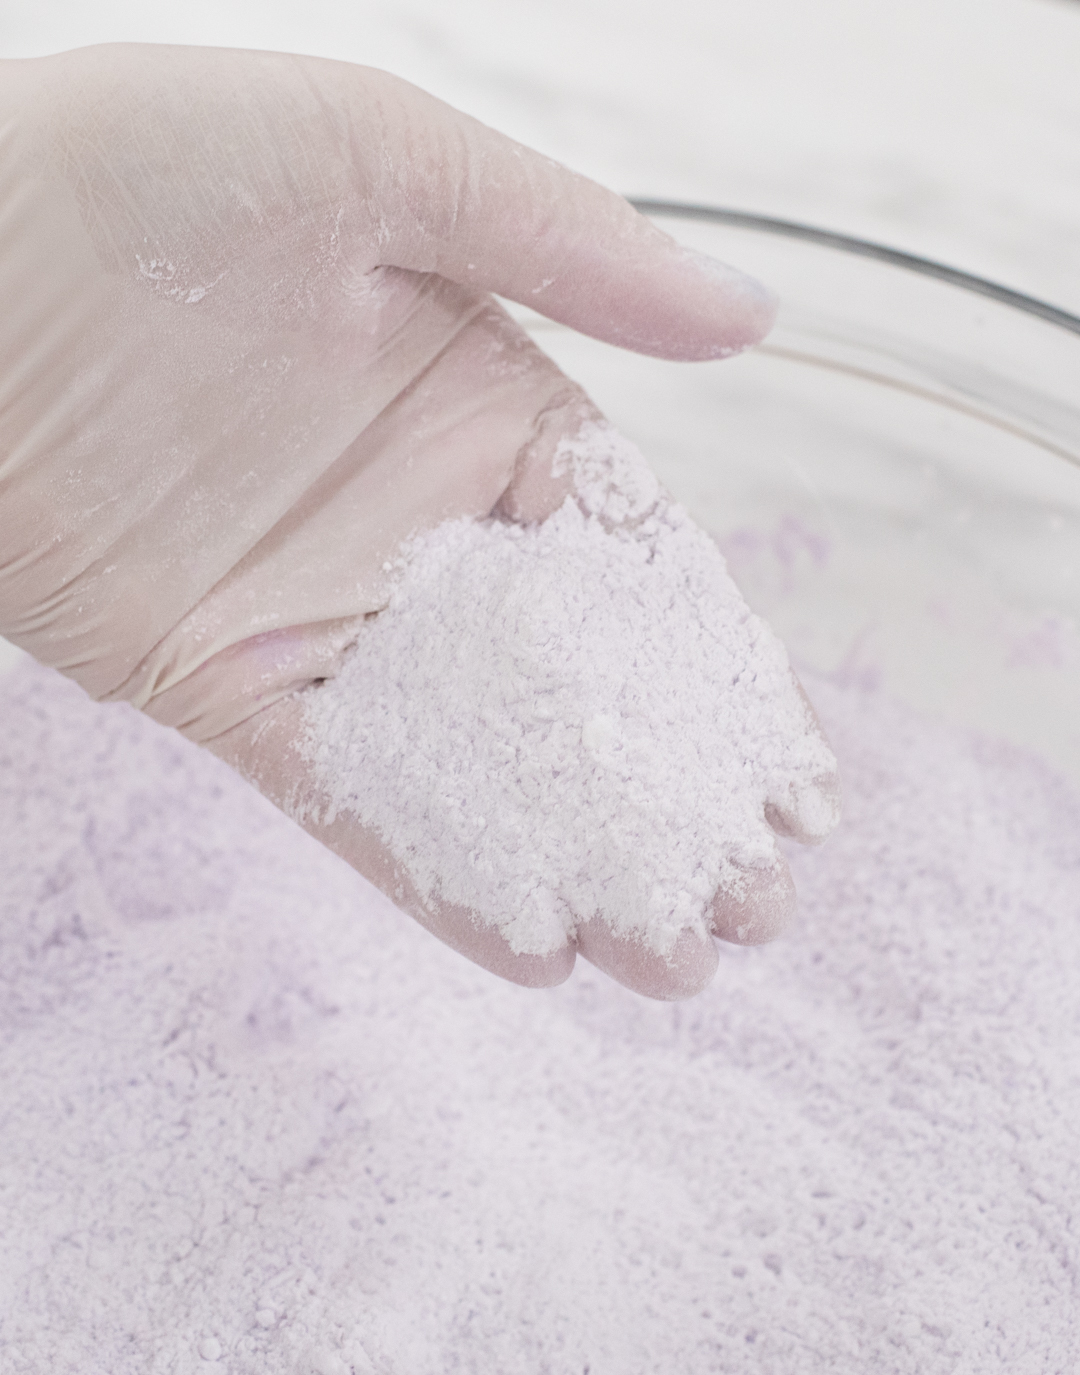 No clumps in bath bomb dry ingredients.